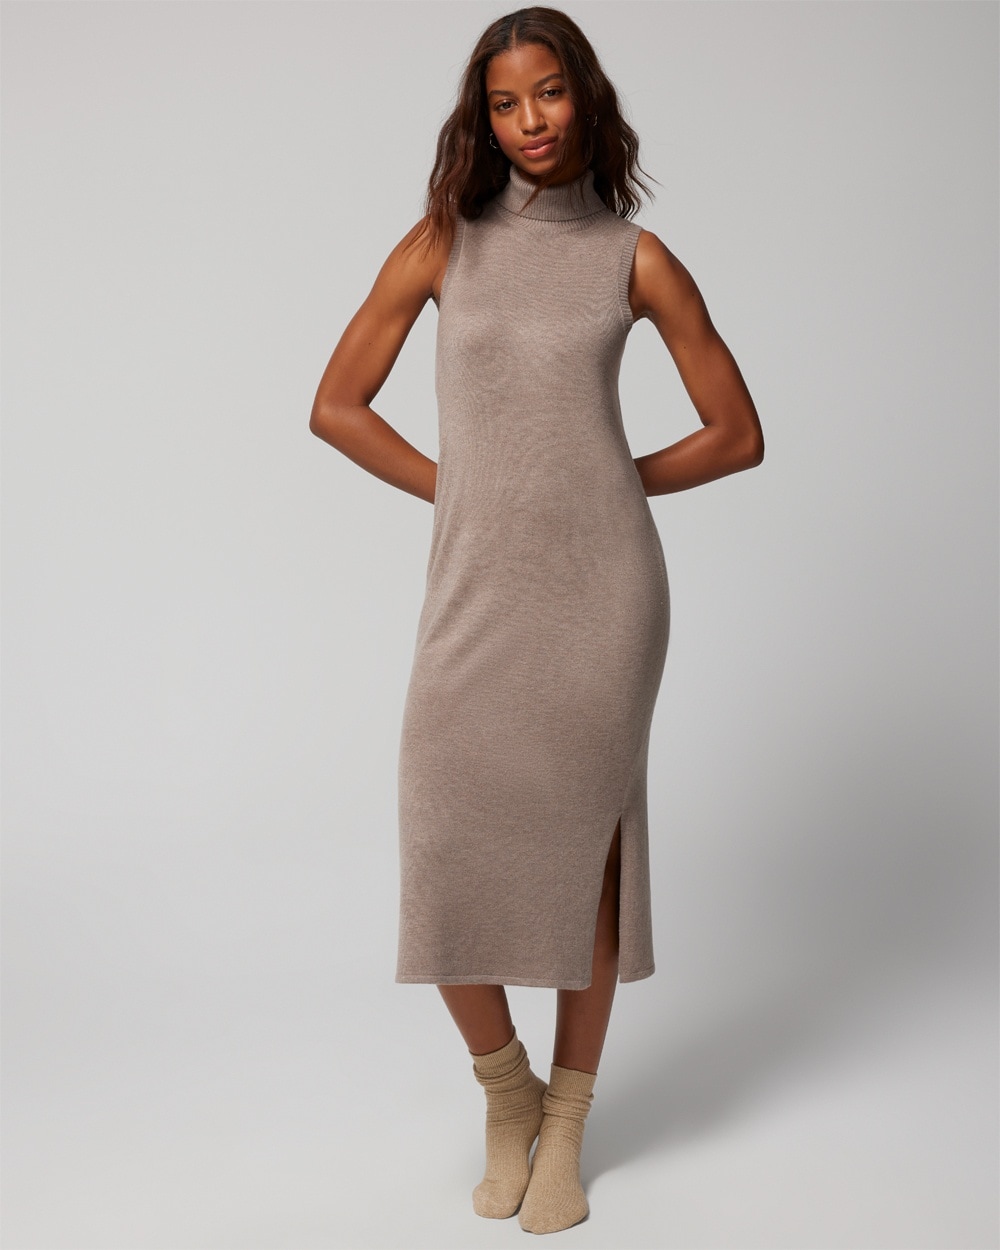 Luxe Soft Sweater Midi Dress video preview image, click to start video